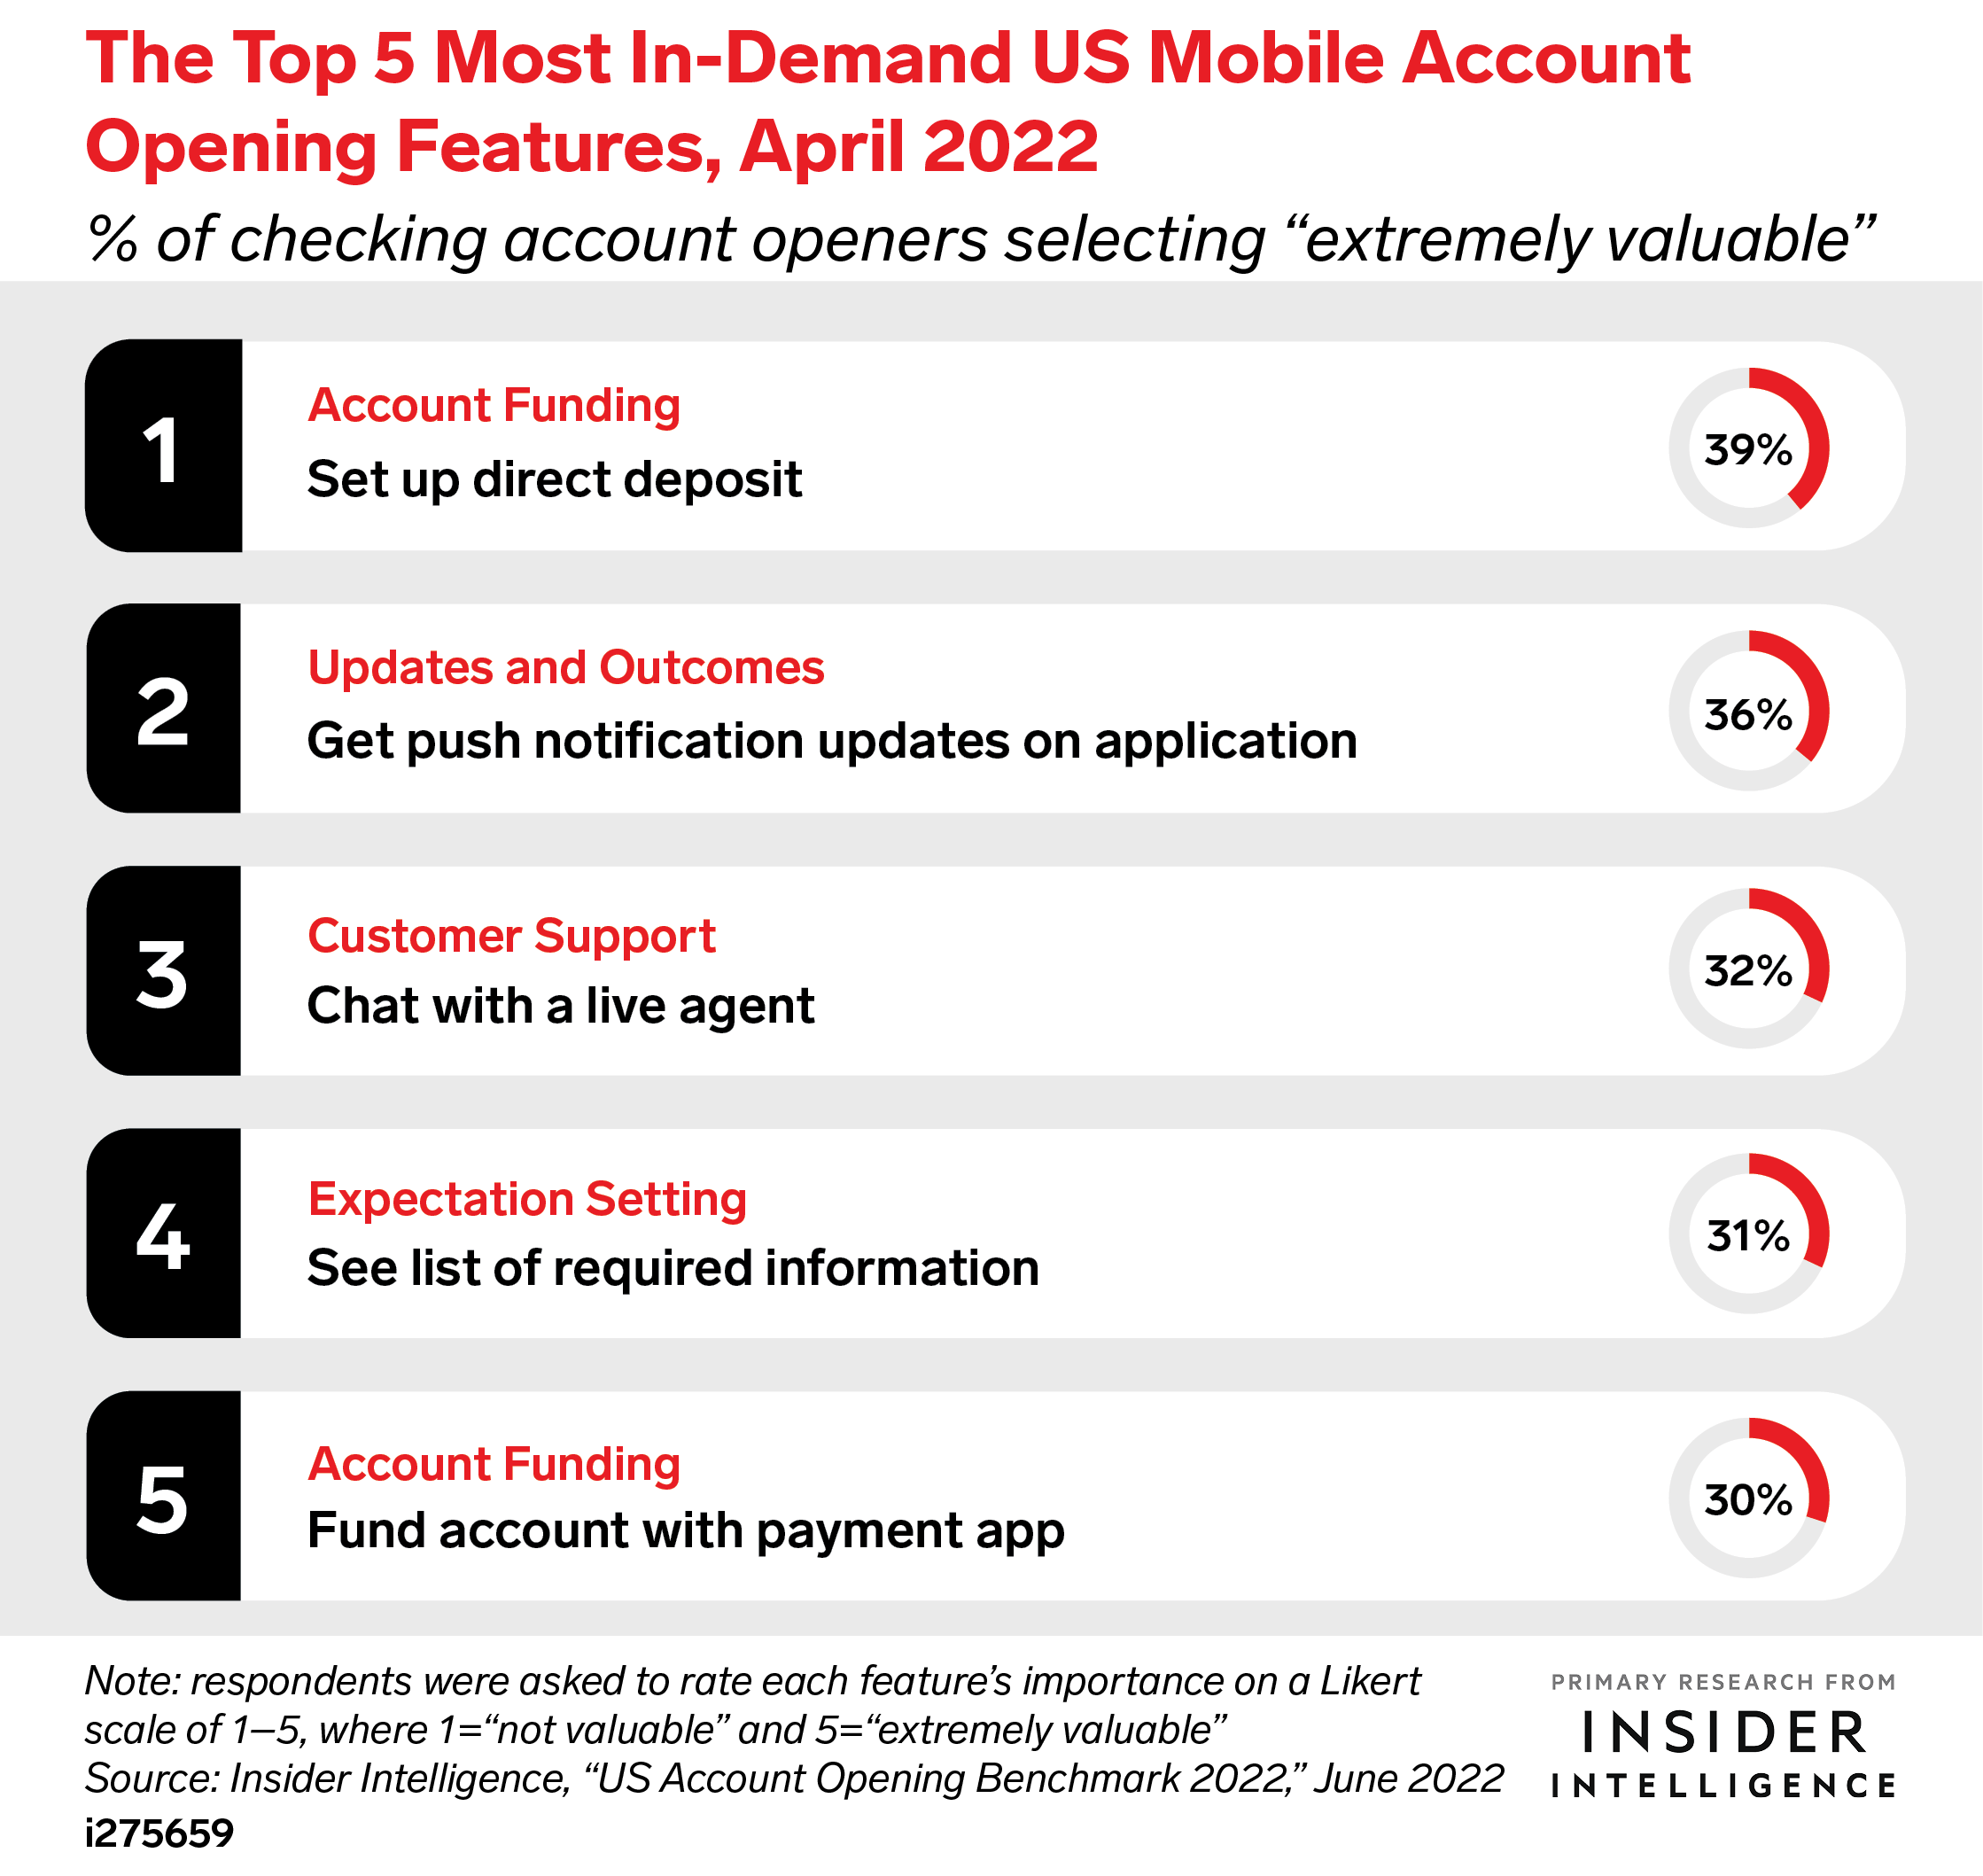 The Top 5 Most In-Demand US Mobile Account Opening Features, April 2022 (% of checking account openers selecting 